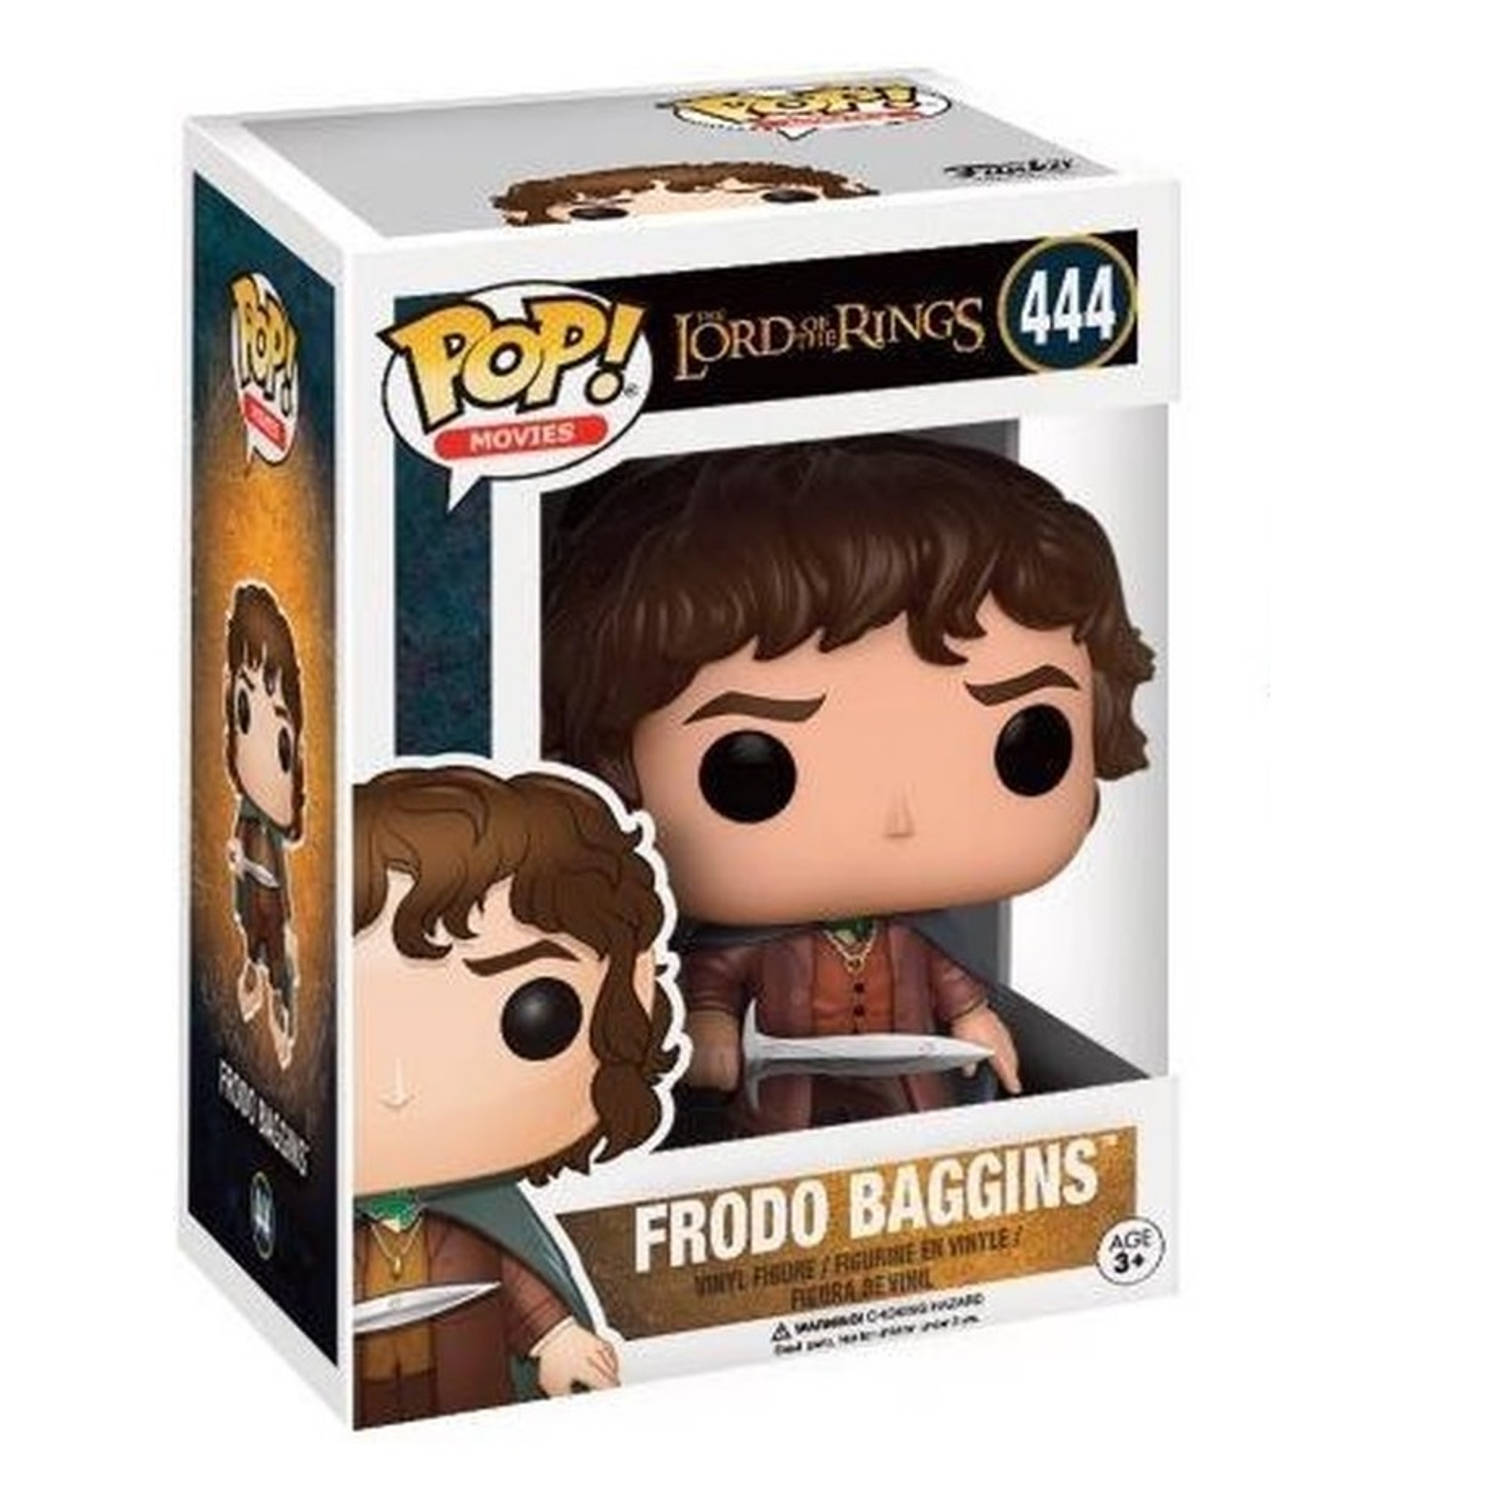 Funko Pop! Movies: Lord Of The Rings Frodo Baggins - Verzamelfiguur